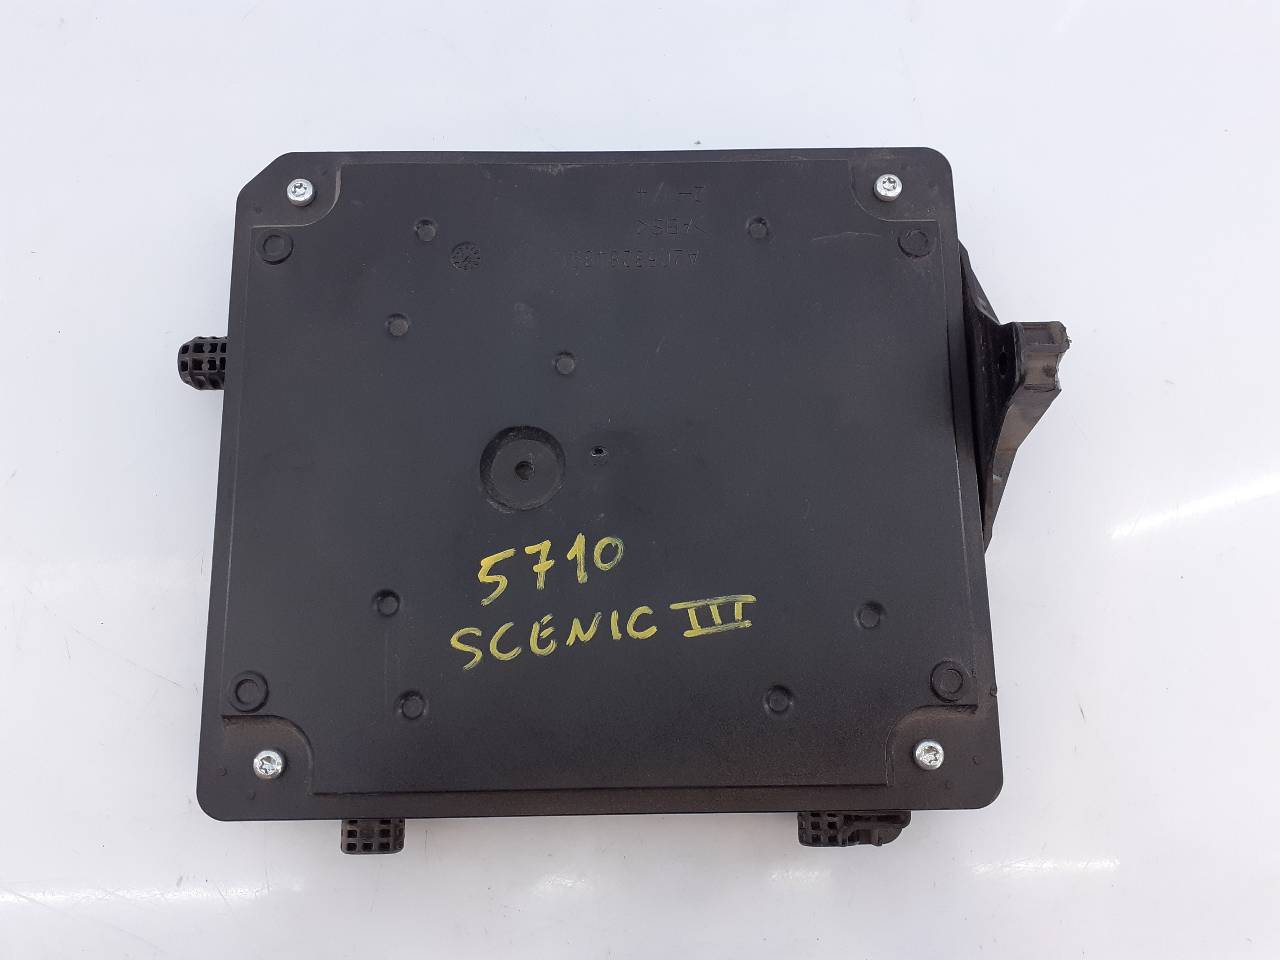 RENAULT Scenic 3 generation (2009-2015) Other Control Units A2C53284891, 284B17882R, E2-A1-39-7 18735355